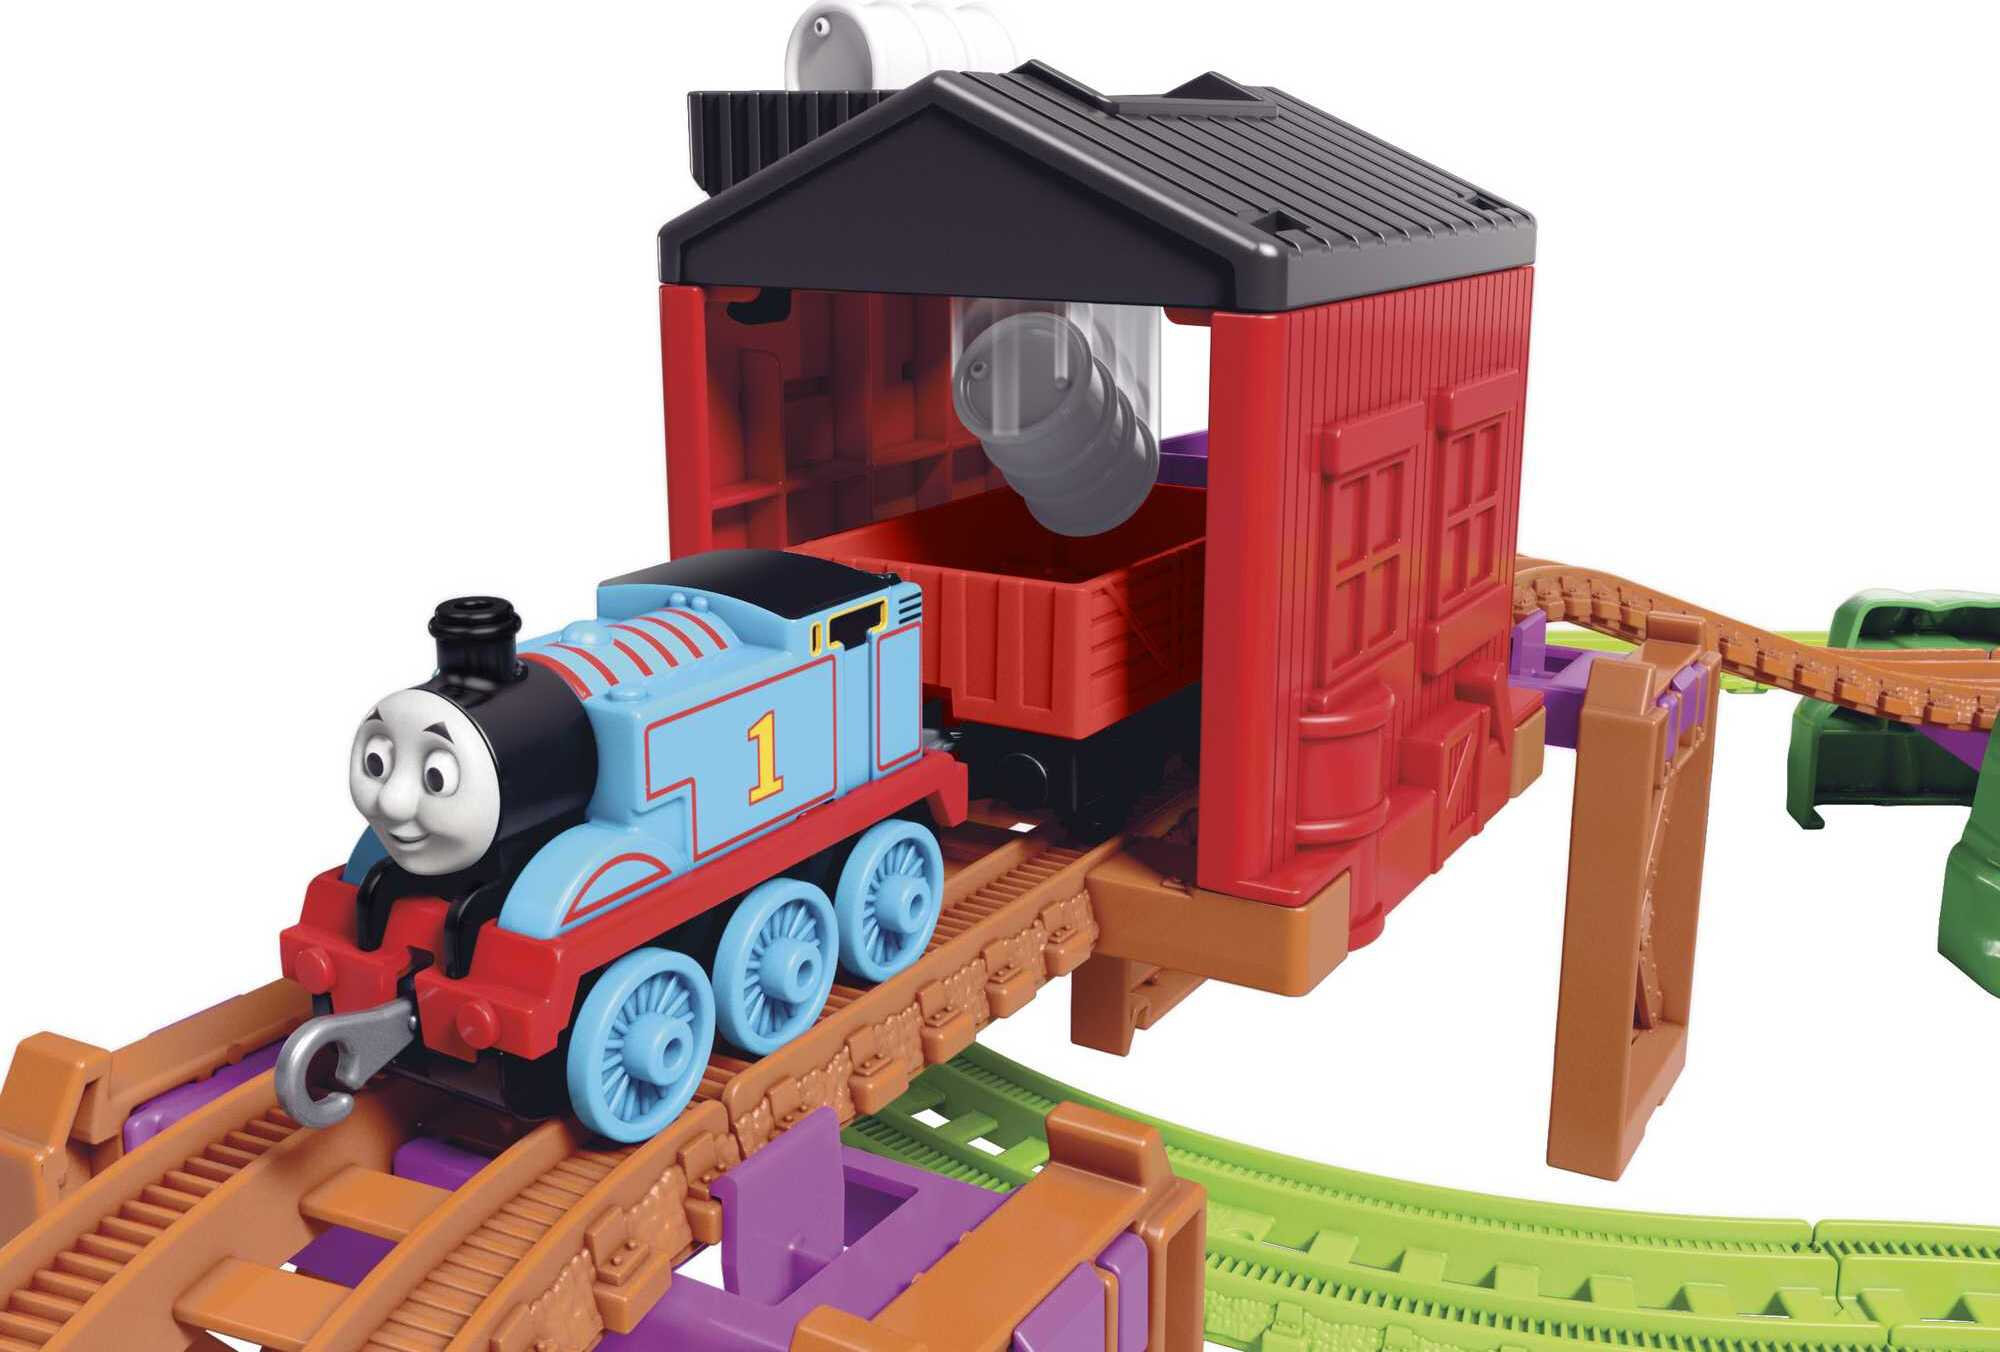 Thomas & Friends Thomas & Nia Cargo Delivery Diecast Toy Train & Track Set, 50 Pieces - image 3 of 6